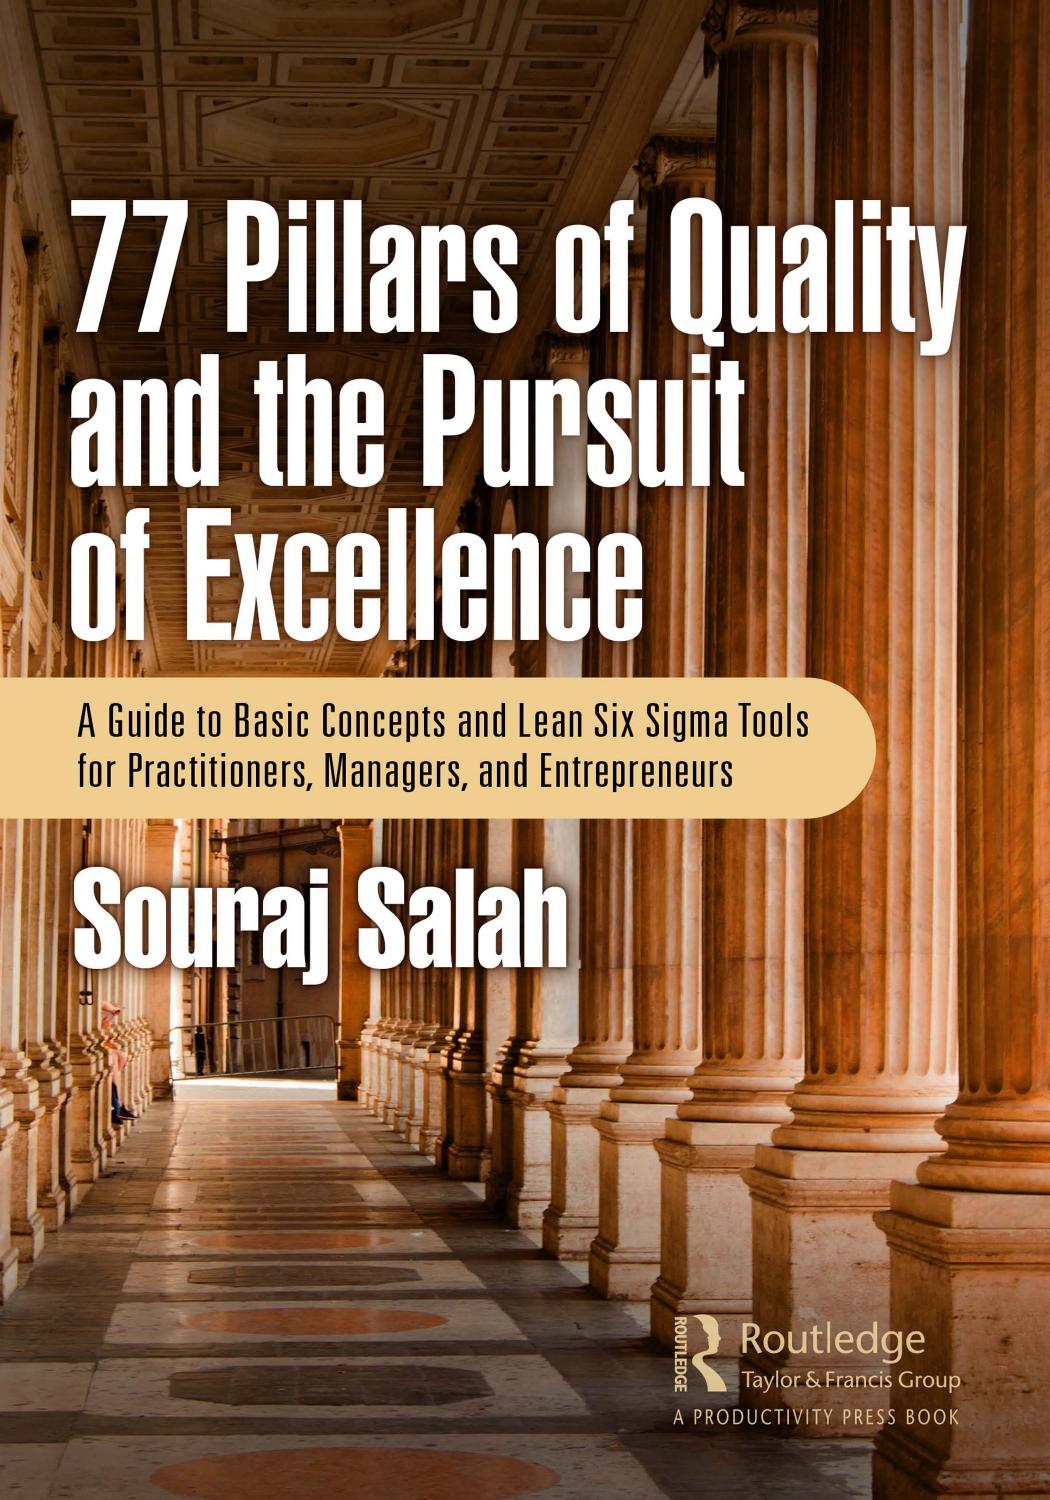 77 Pillars of Quality and the Pursuit of Excellence; A Guide to Basic Concepts and Lean Six Sigma Tools for Practitioners, Managers, and Entrepreneurs